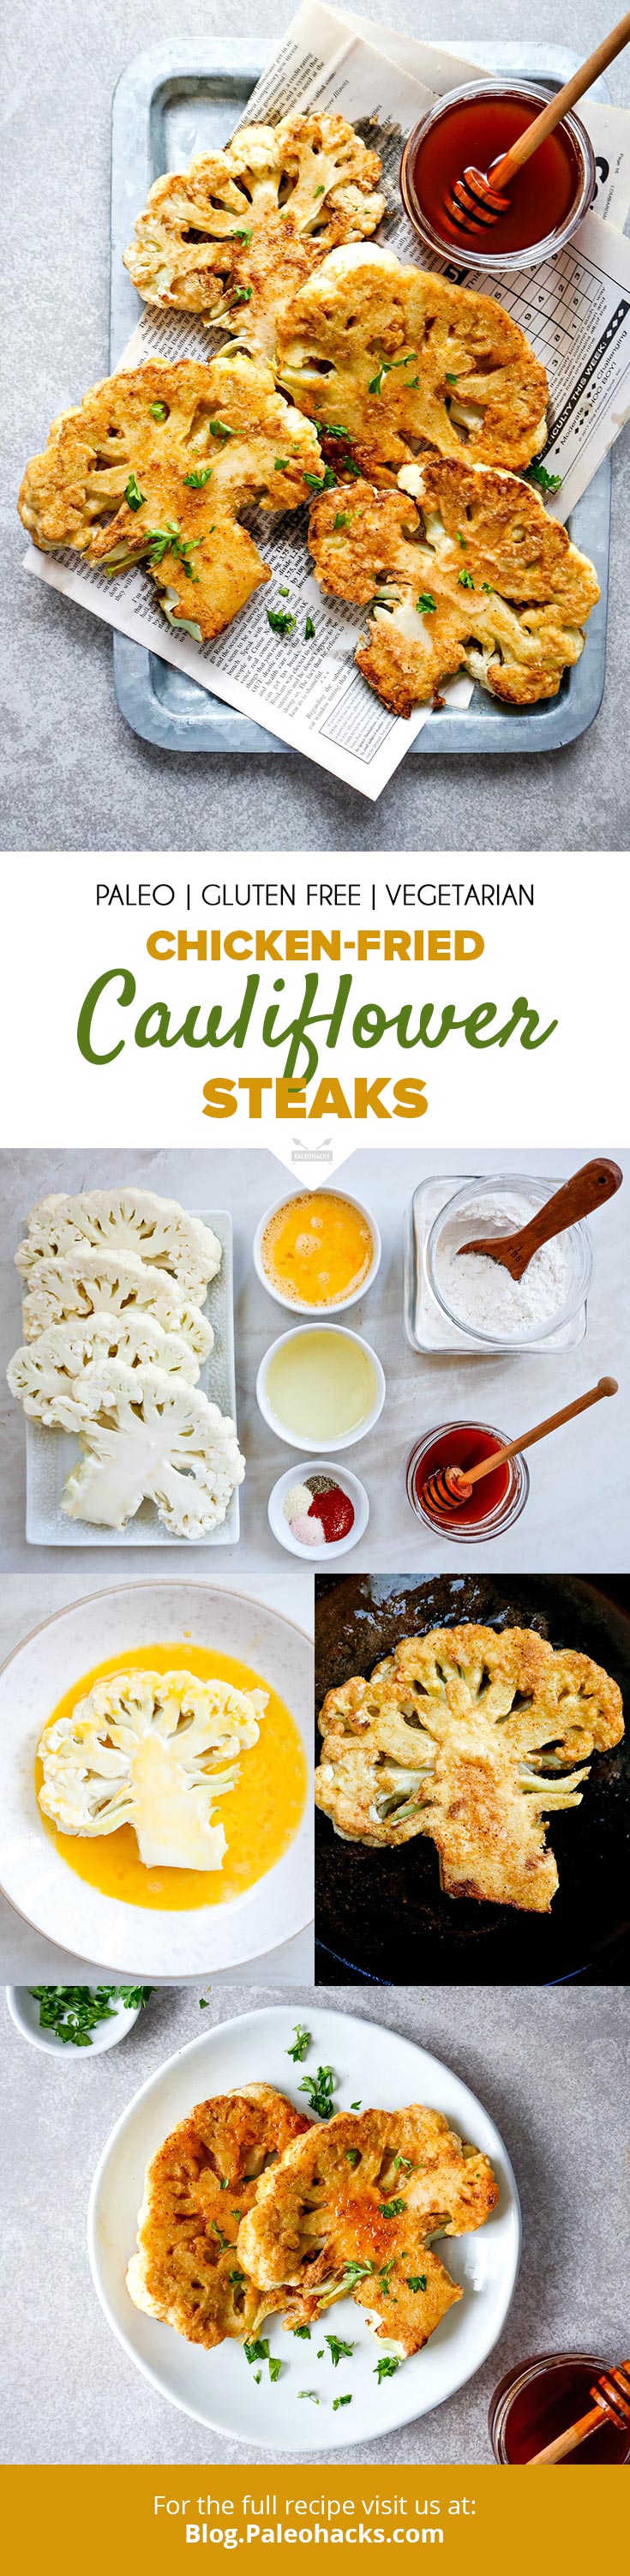 Lightly fry cauliflower into golden brown “steaks” for a veggie-fueled dish. One bite and you'll never look at chicken the same.